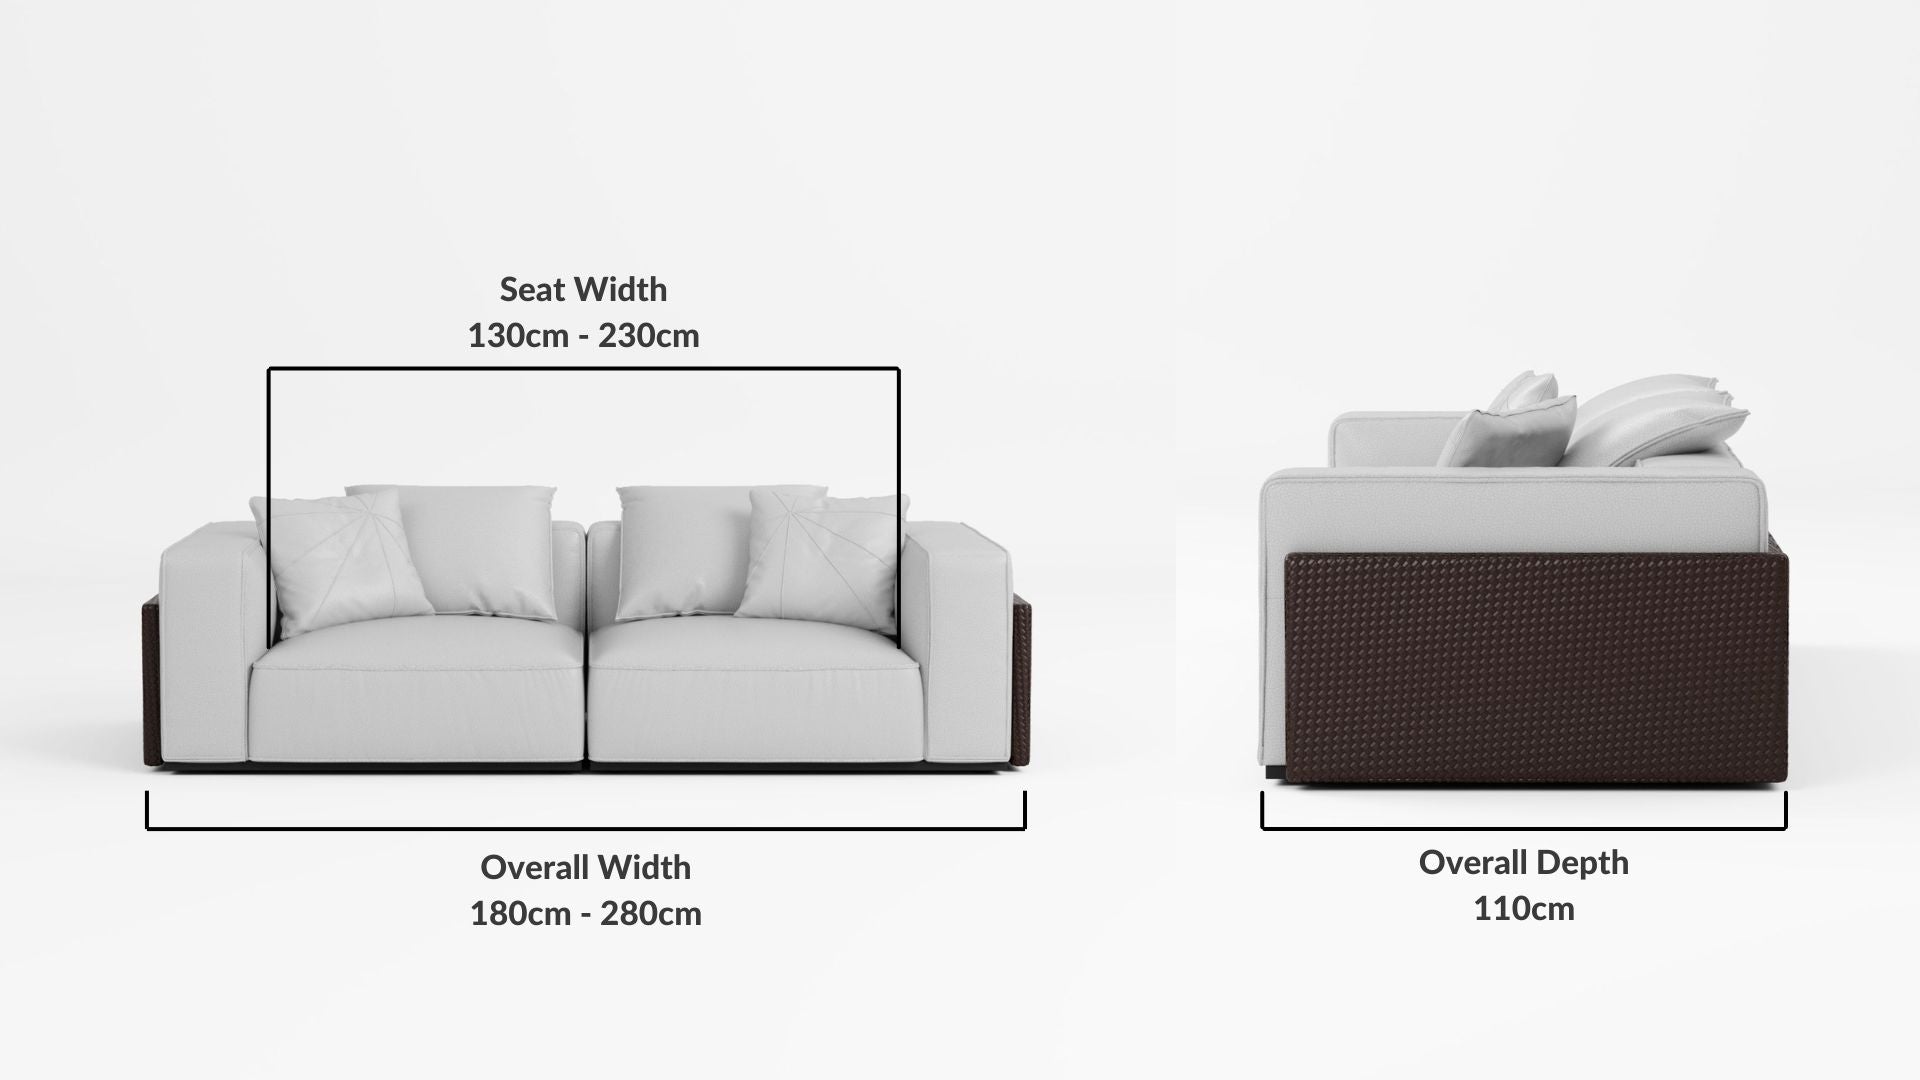 Details the key dimensions in terms of overall width, overall depth and seat width for Carson Half Leather Sofa